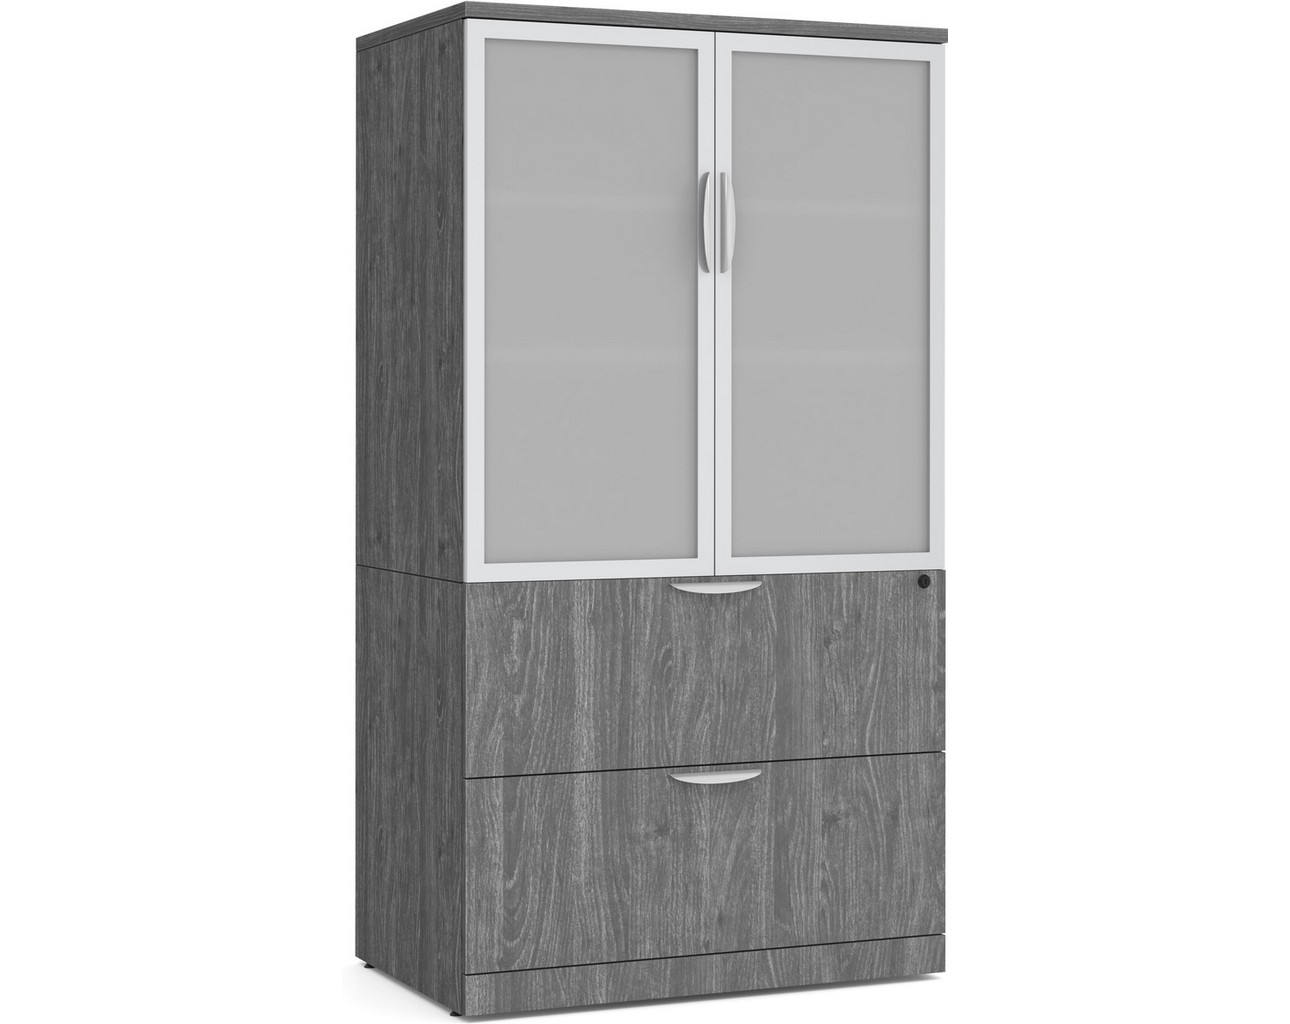 Locking Storage Cabinet and Lateral File Combo Unit with Glass Doors – Newport Grey